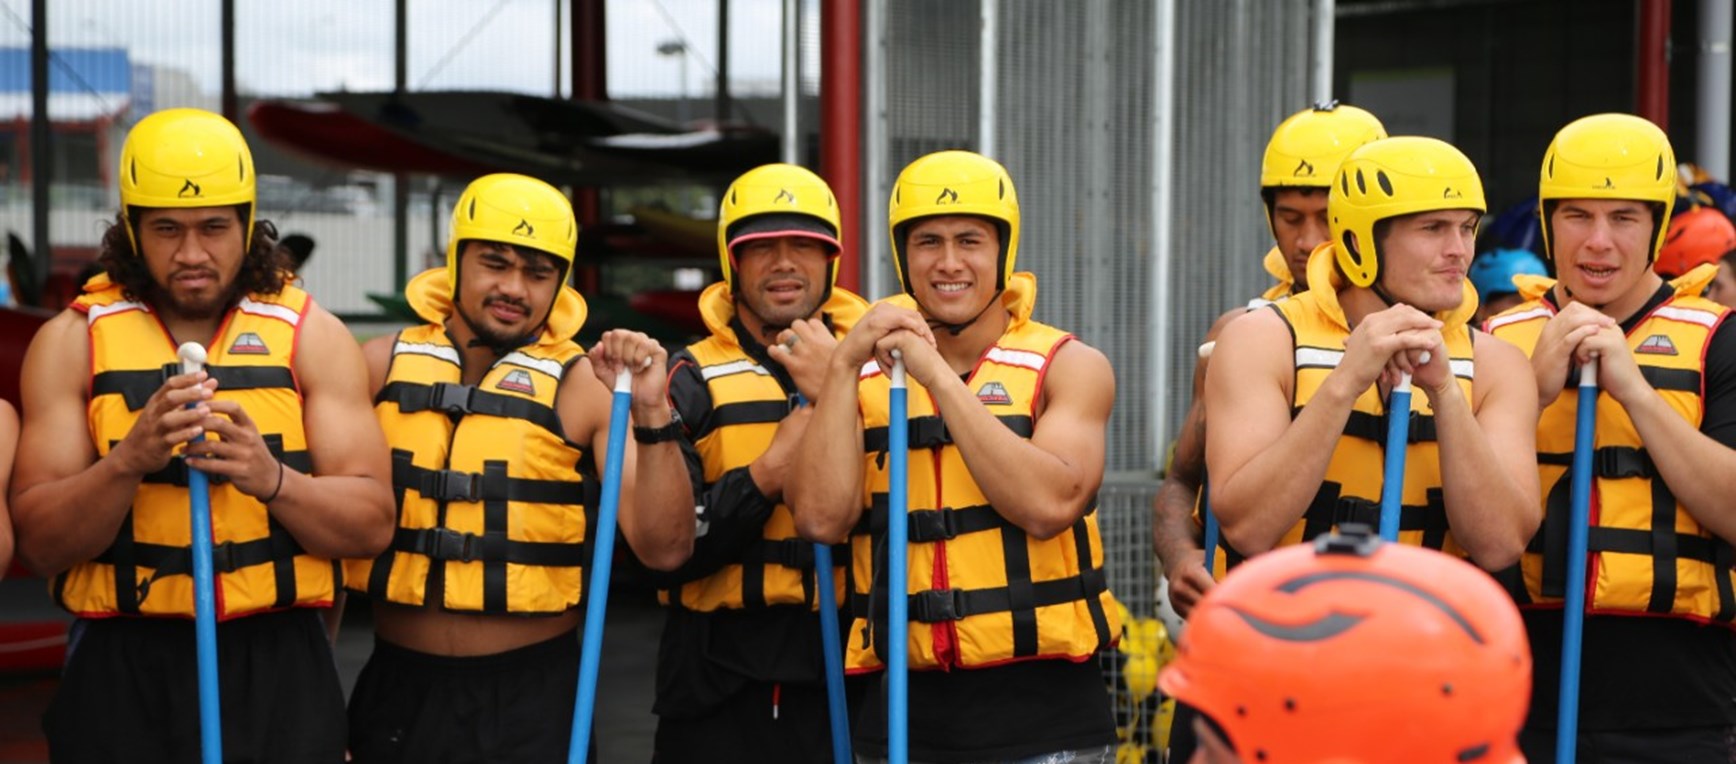 White water rafting in pictures